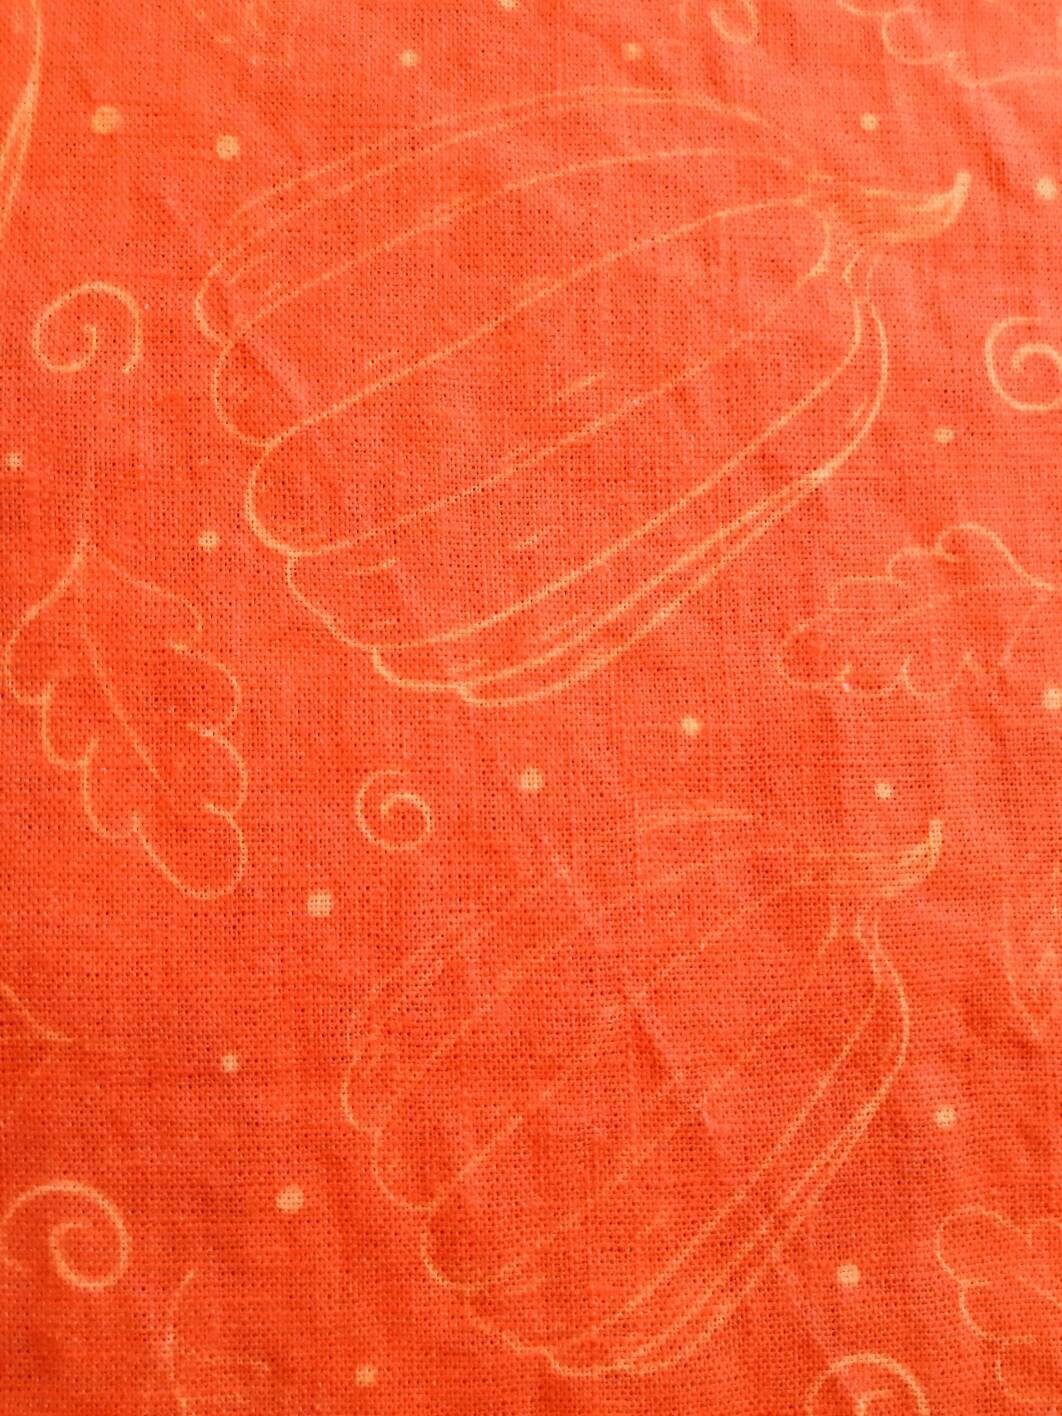 Halloween Linen Fabric By The Yard, Printed Linen Fabric By The Yard For Clothing & Home Textile - Width 148 cm/1.62yd